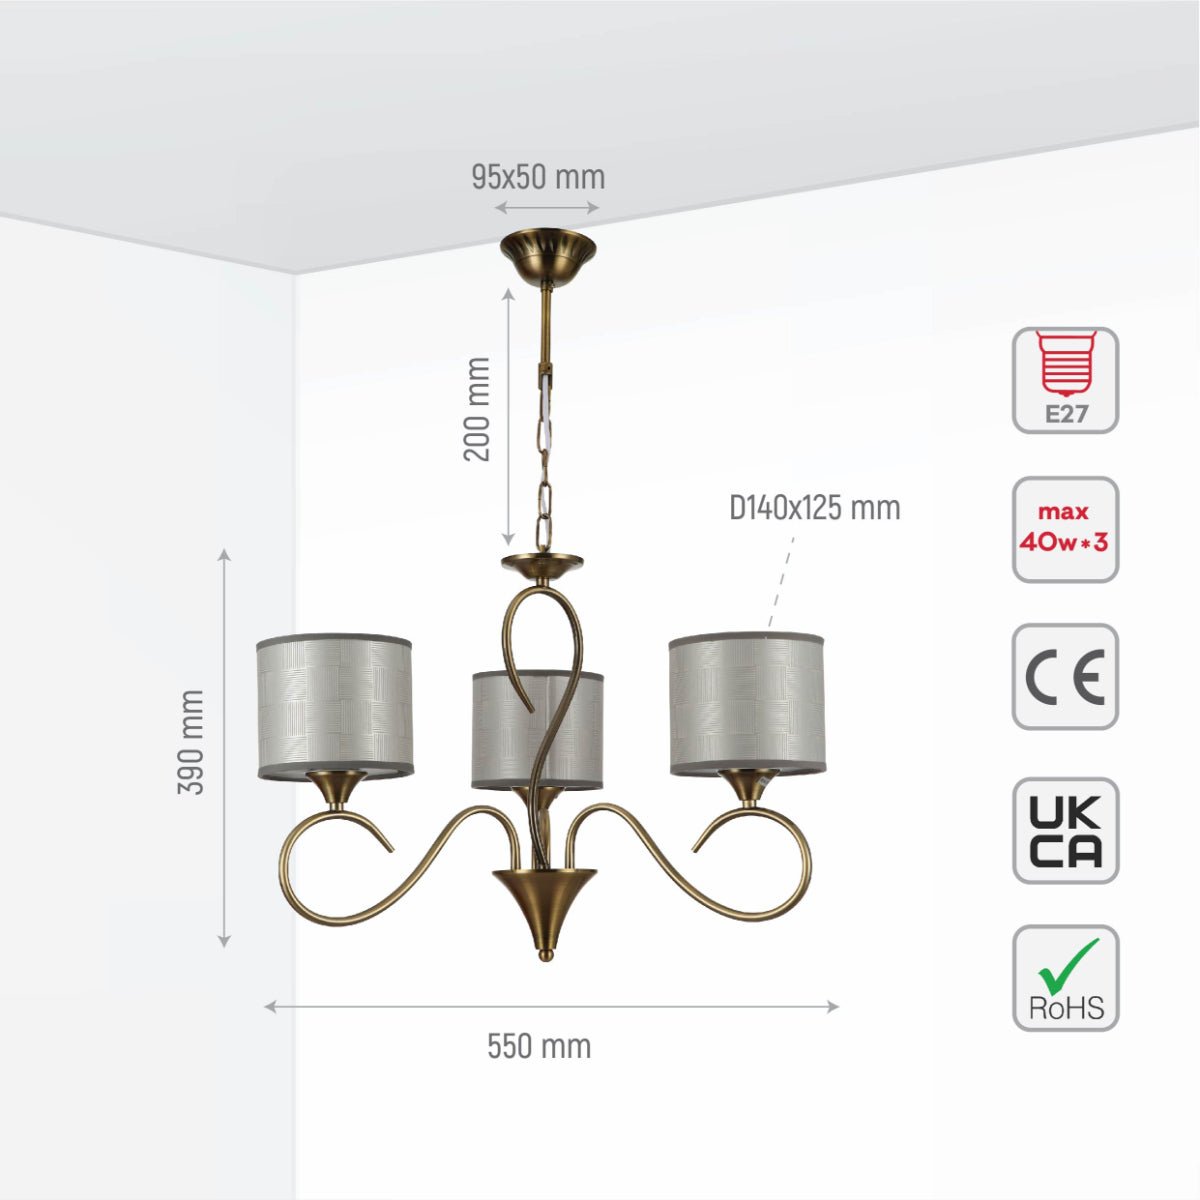 Size and specs of Antique Brass Arm Grey Cylinder Shaded Candle Vintage Chandelier Ceiling Light with E27 Fittings | TEKLED 159-17702